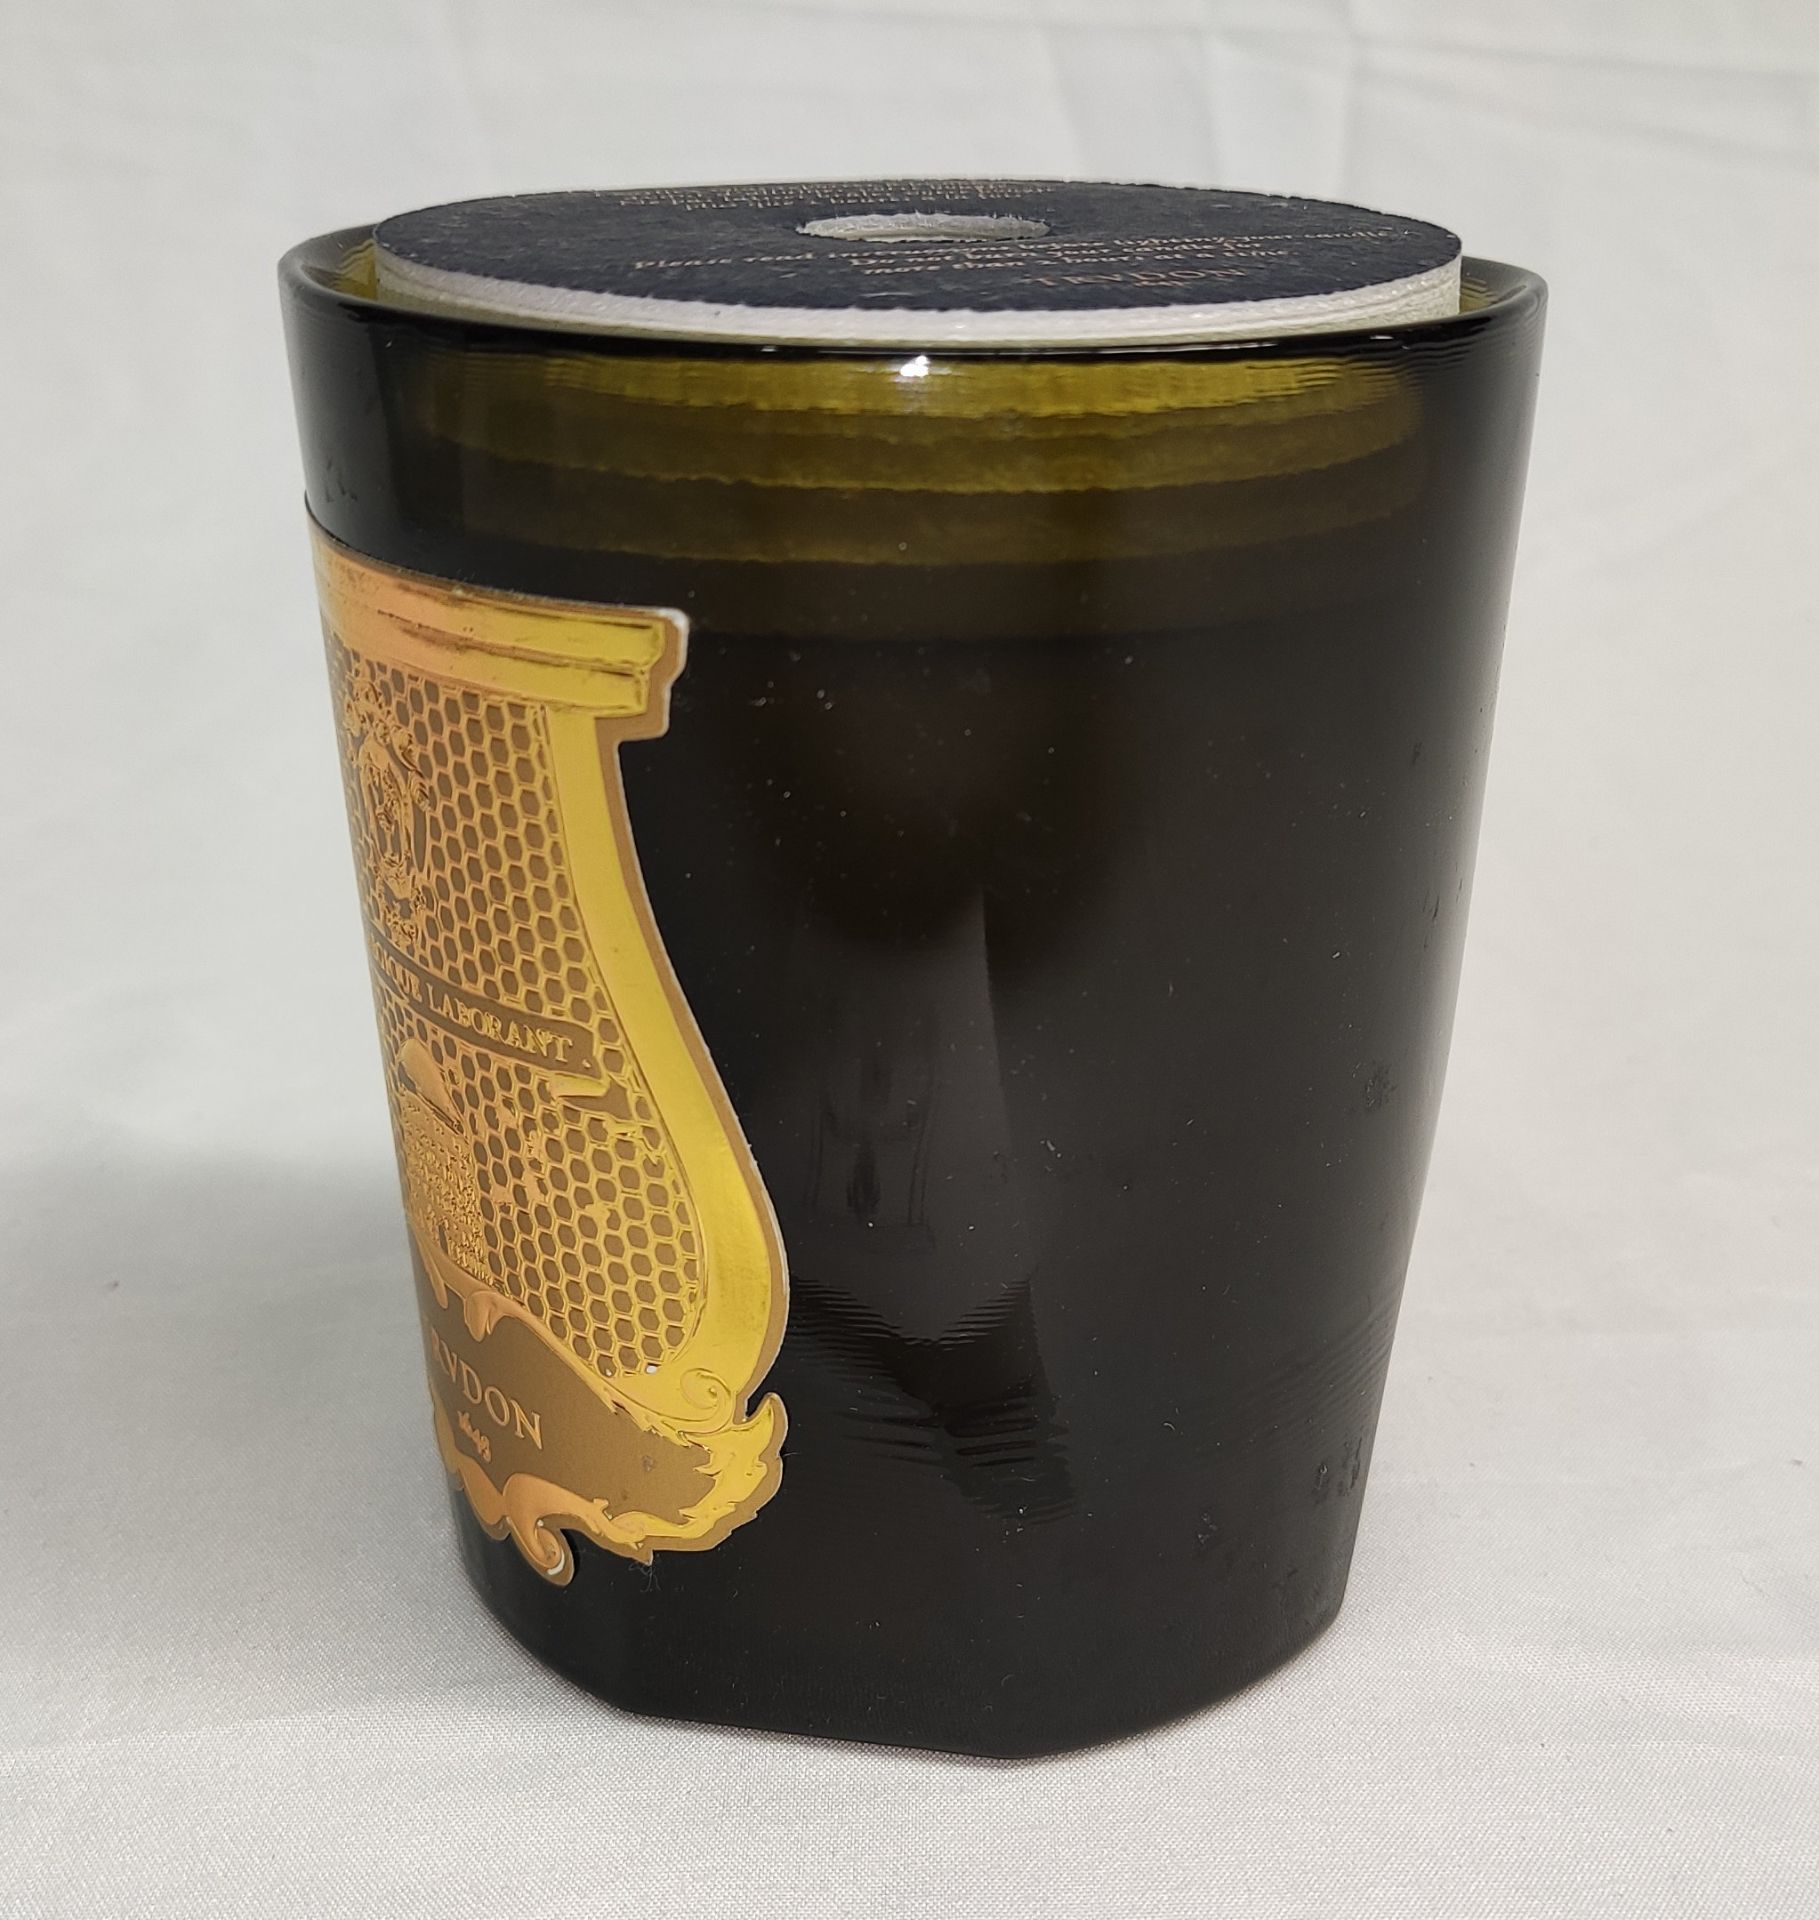 1 x TRUDON Ernesto 270G Candle - Boxed - Original RRP £90 - Ref: 2559342/HJL409/C27/07-23 - - Image 8 of 16